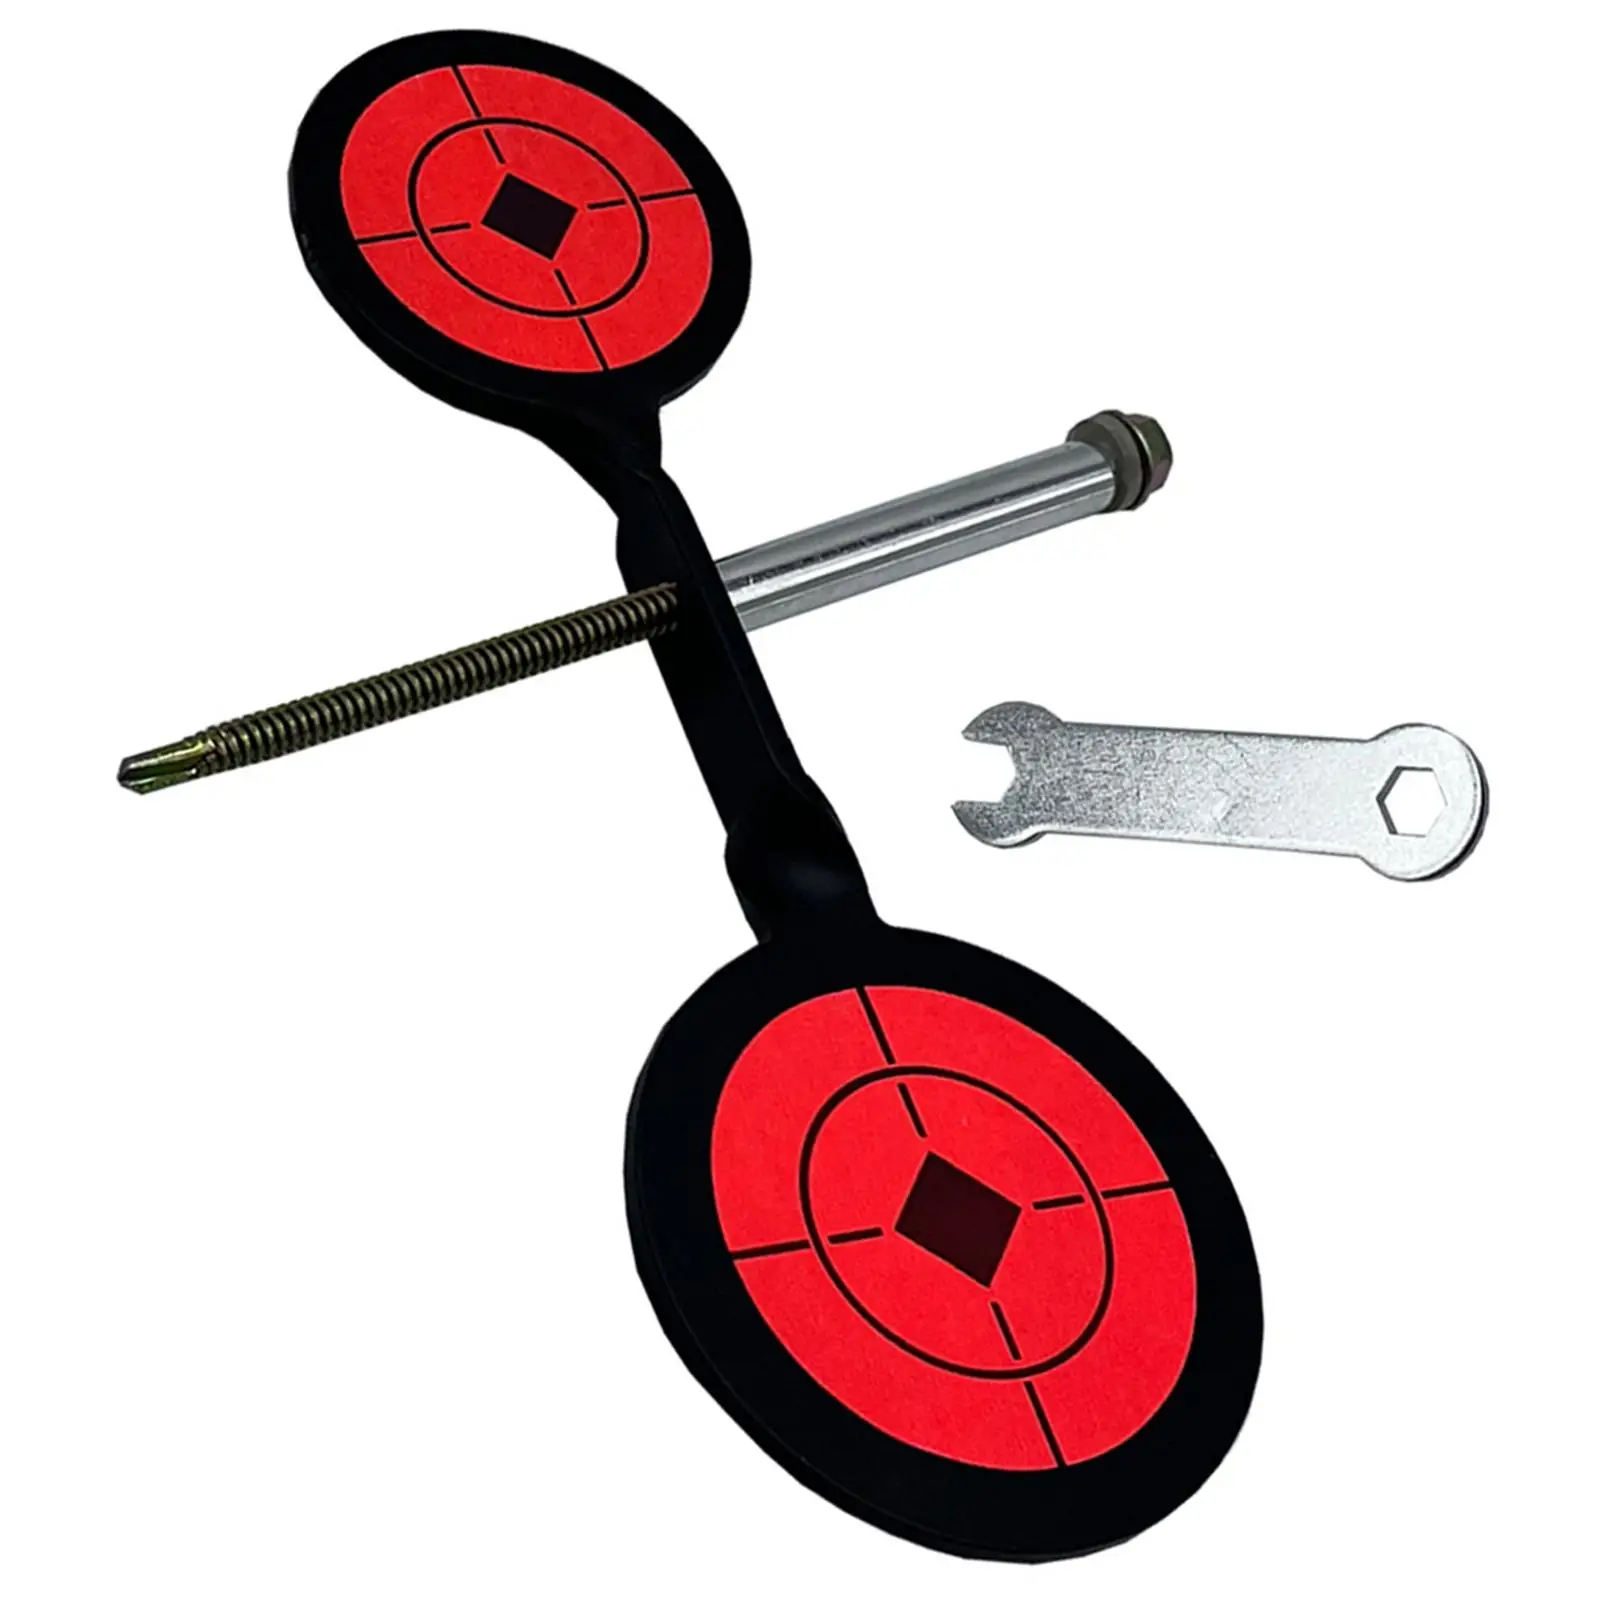 Shooting Target Reset Spinner Resetting Target for Outdoor Hunting Practice